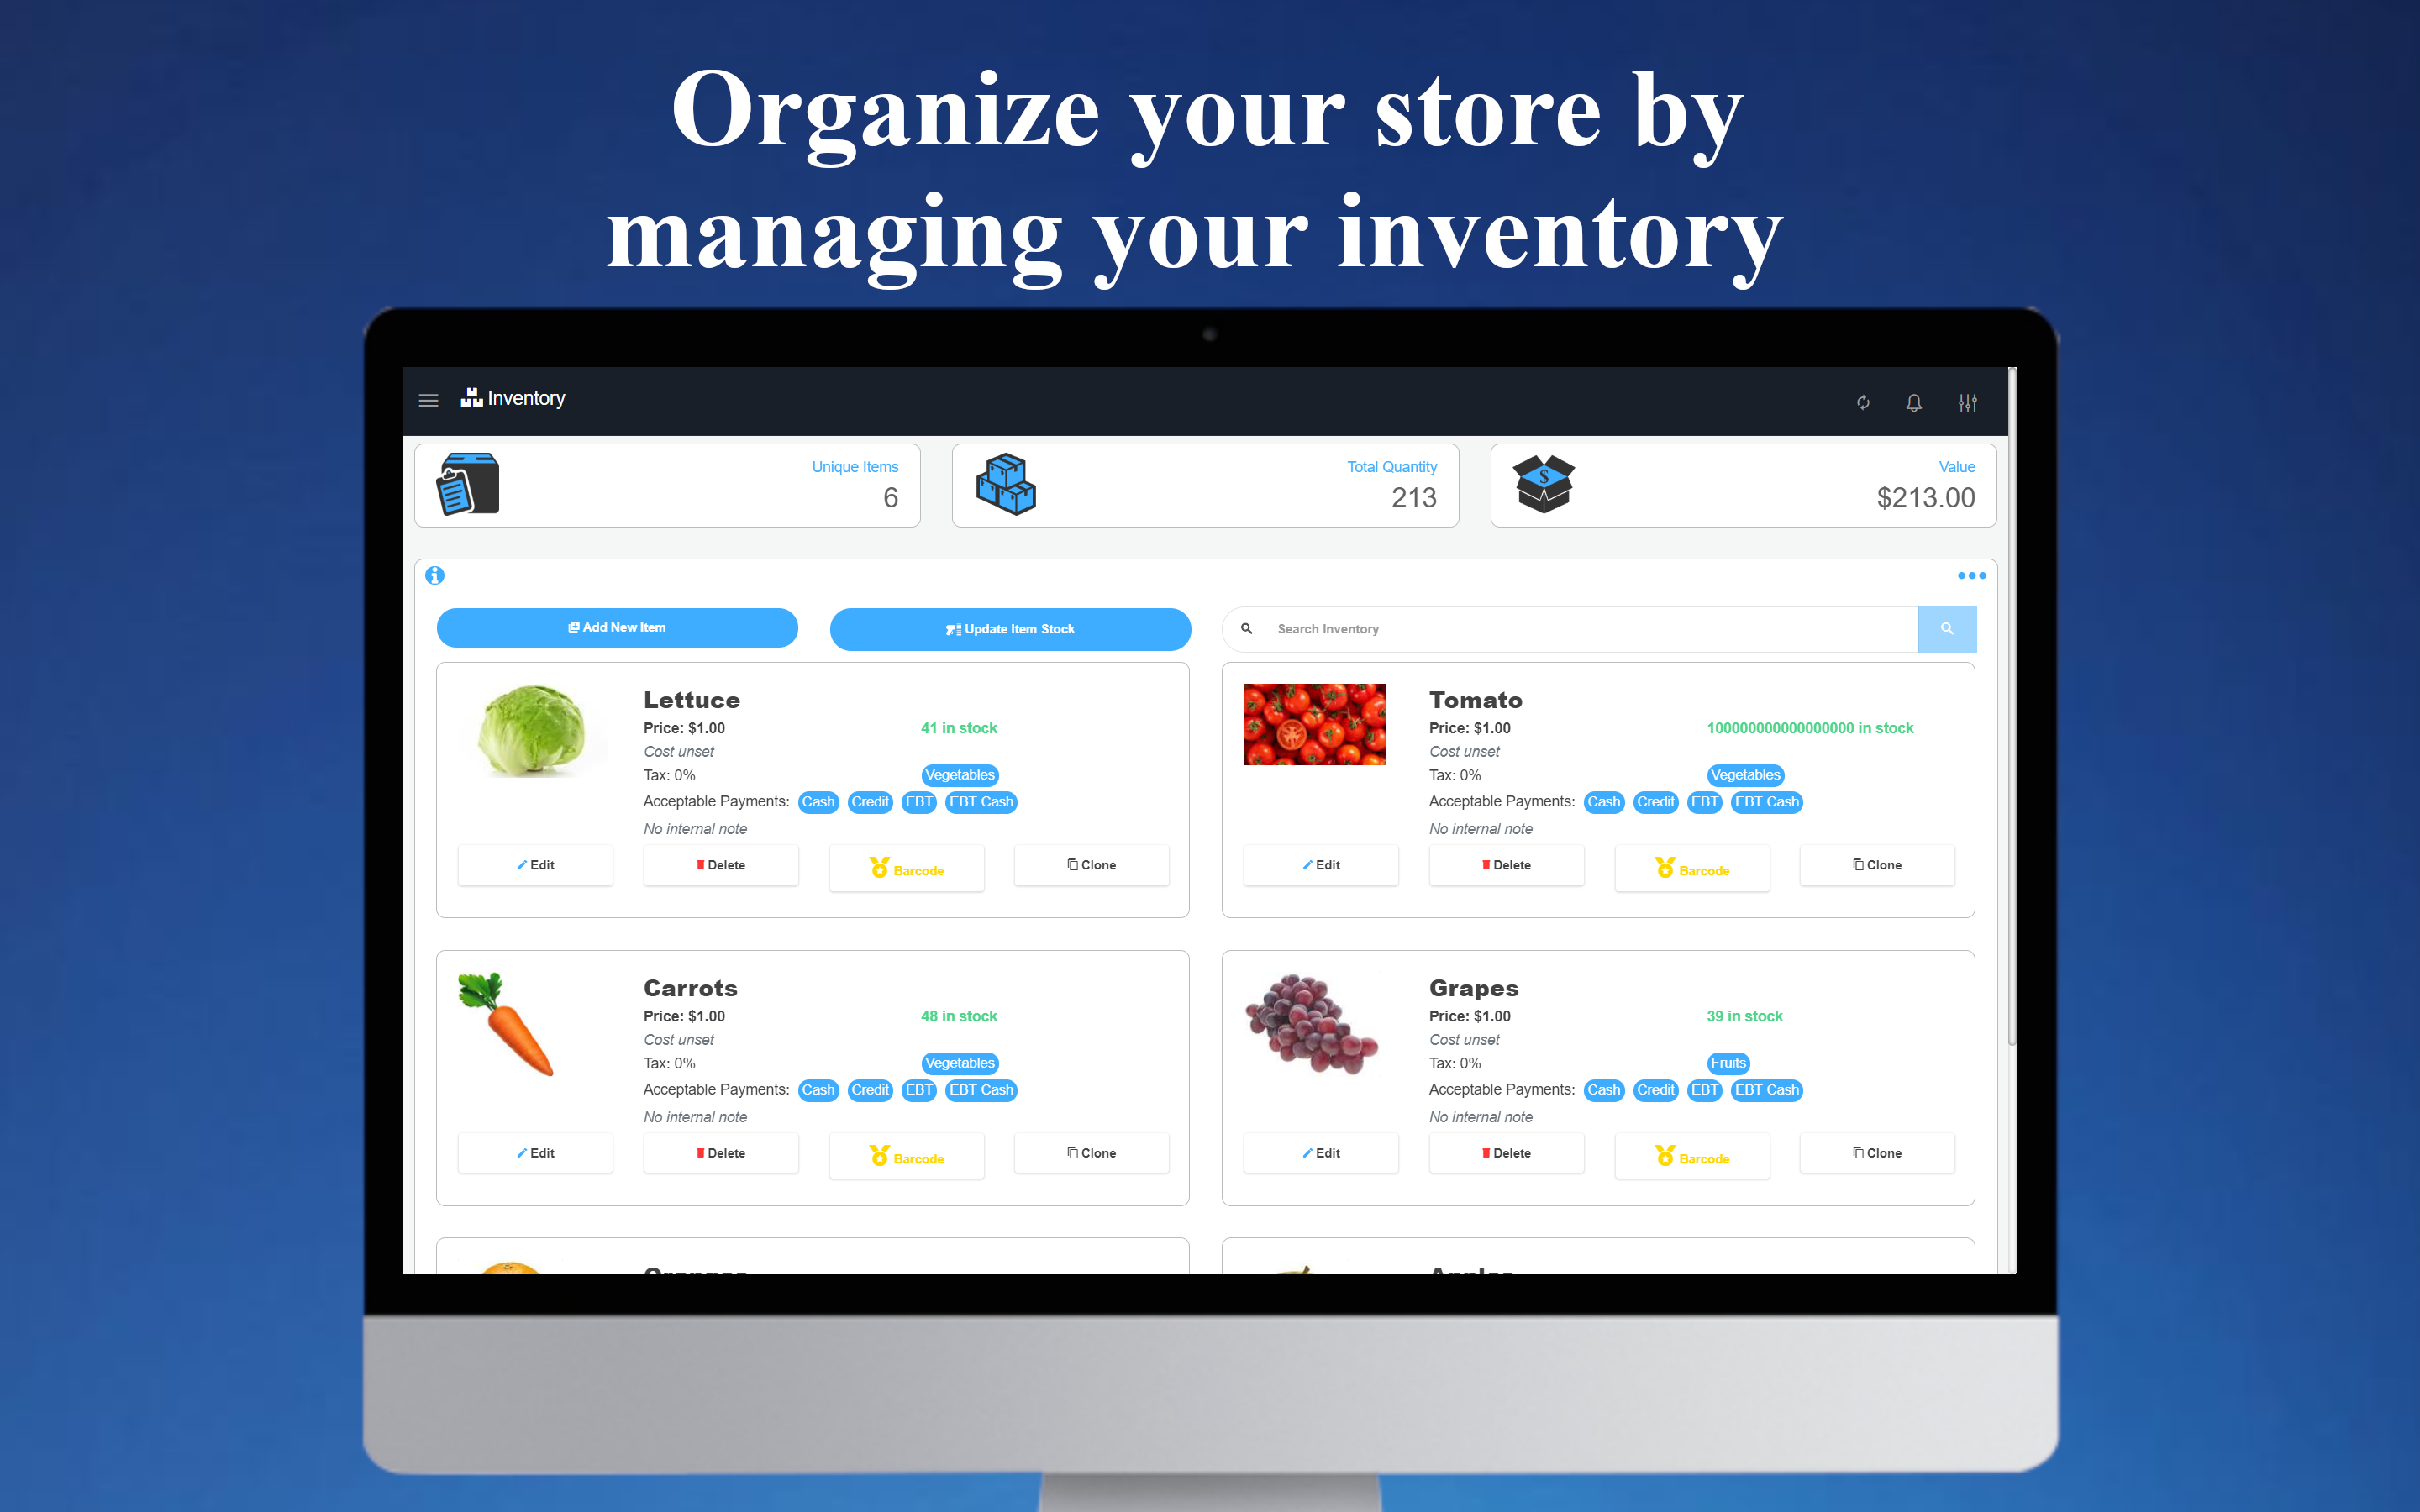 Easy inventory management with a smart image finder feature